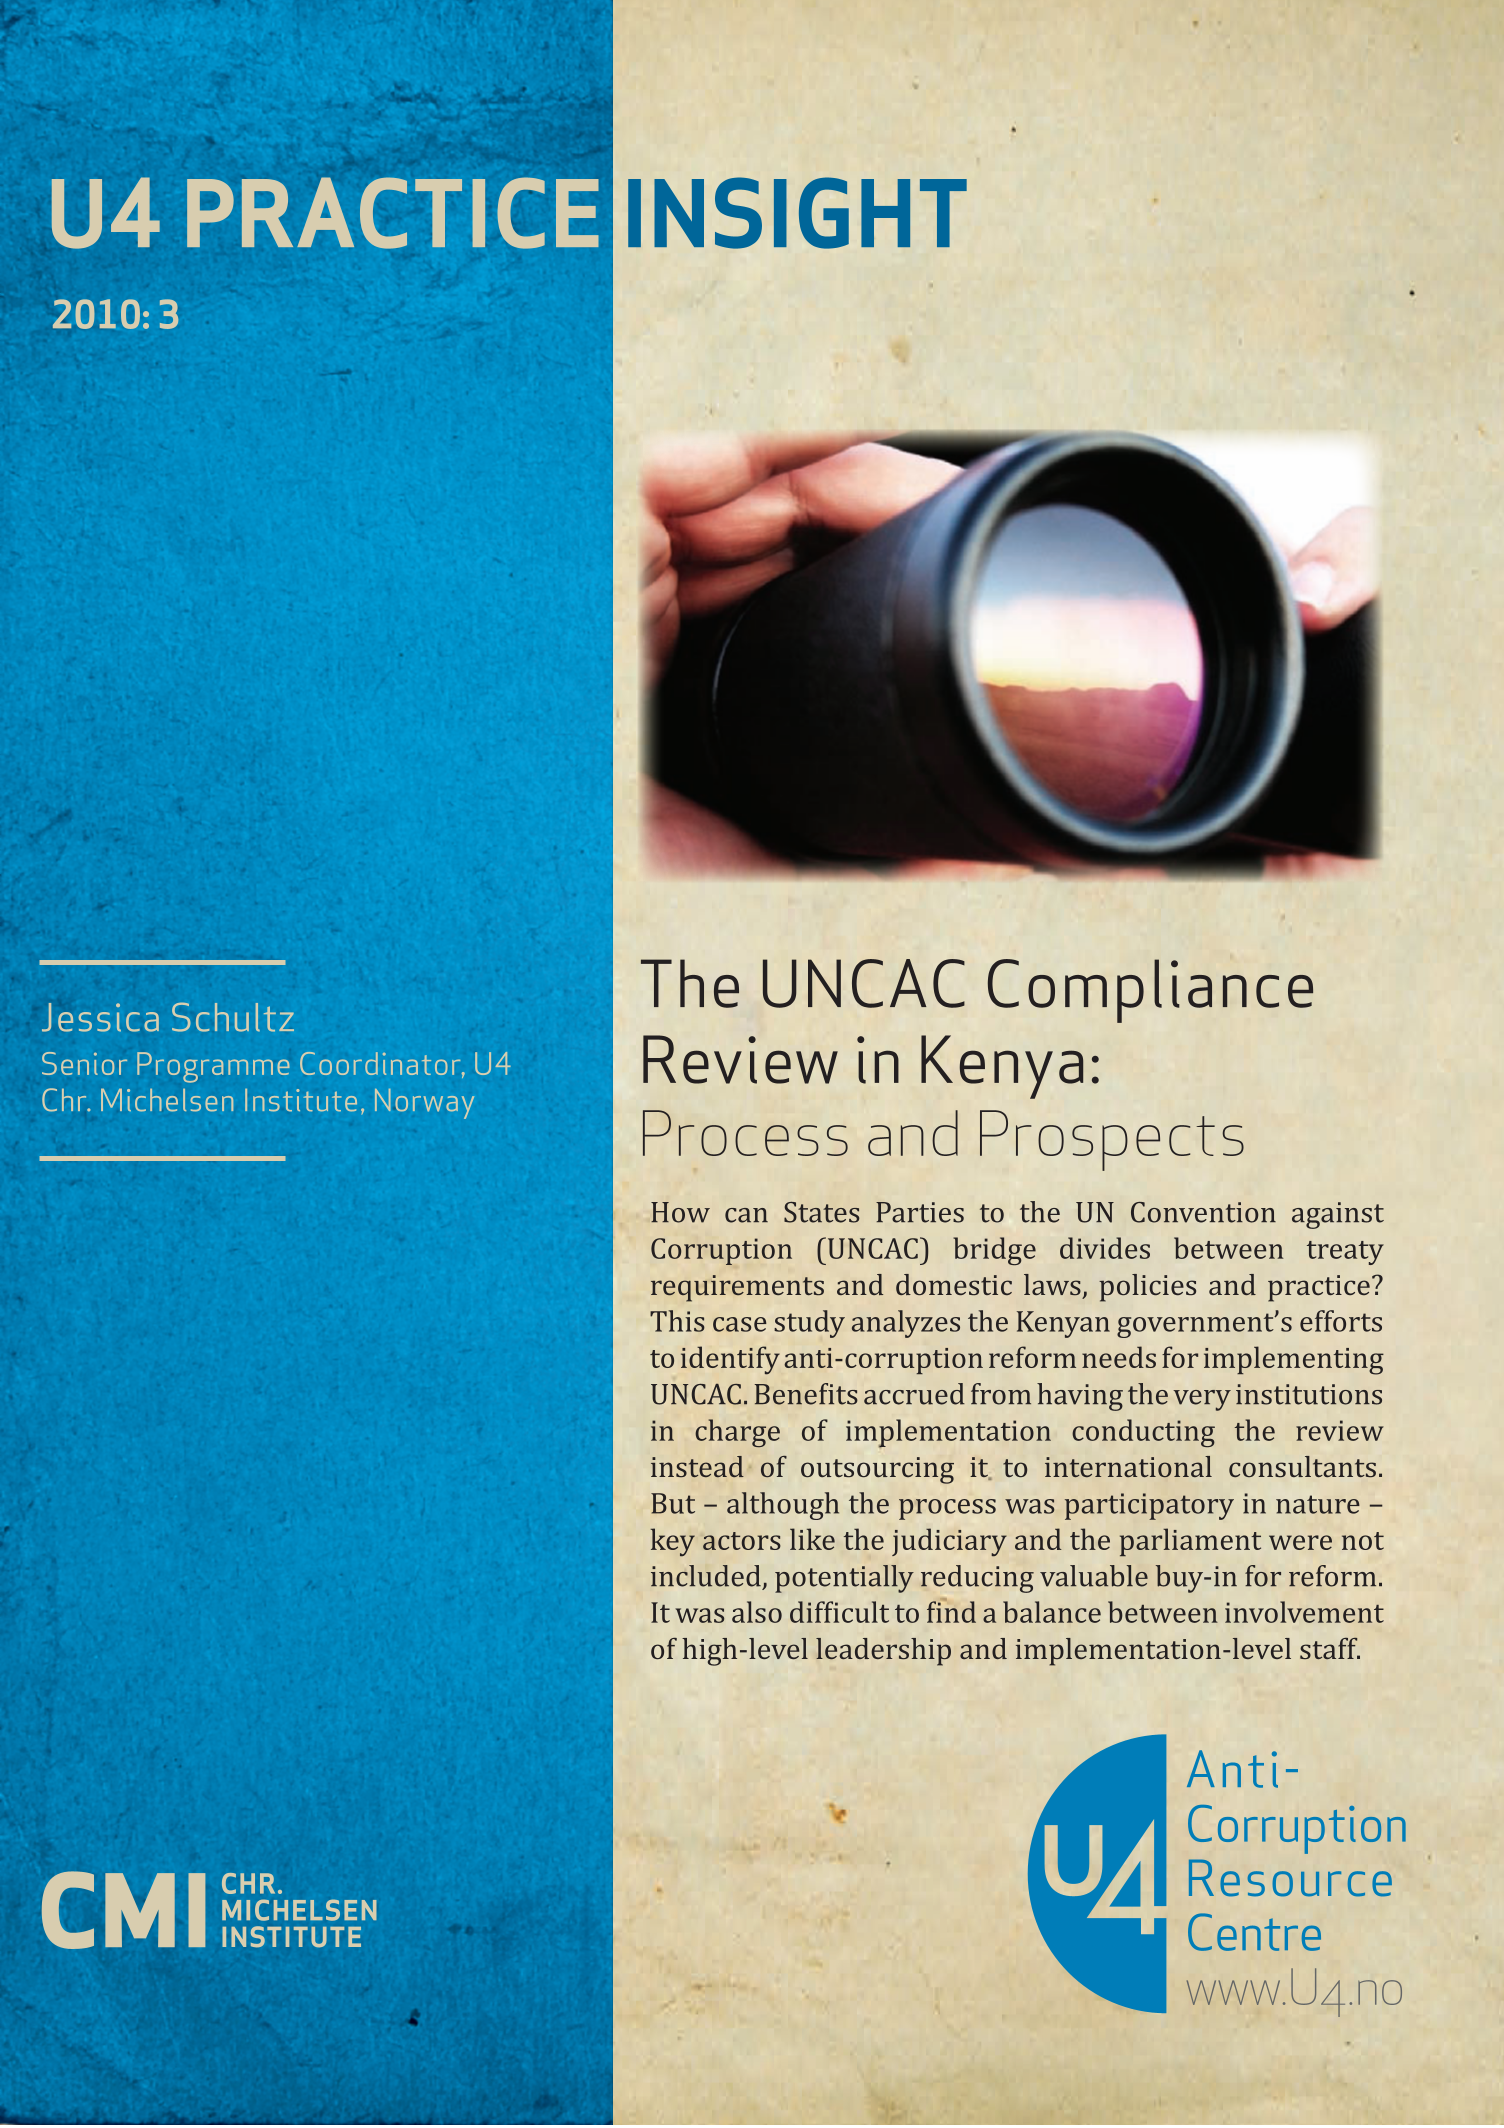 The UNCAC compliance review in Kenya: Process and prospects